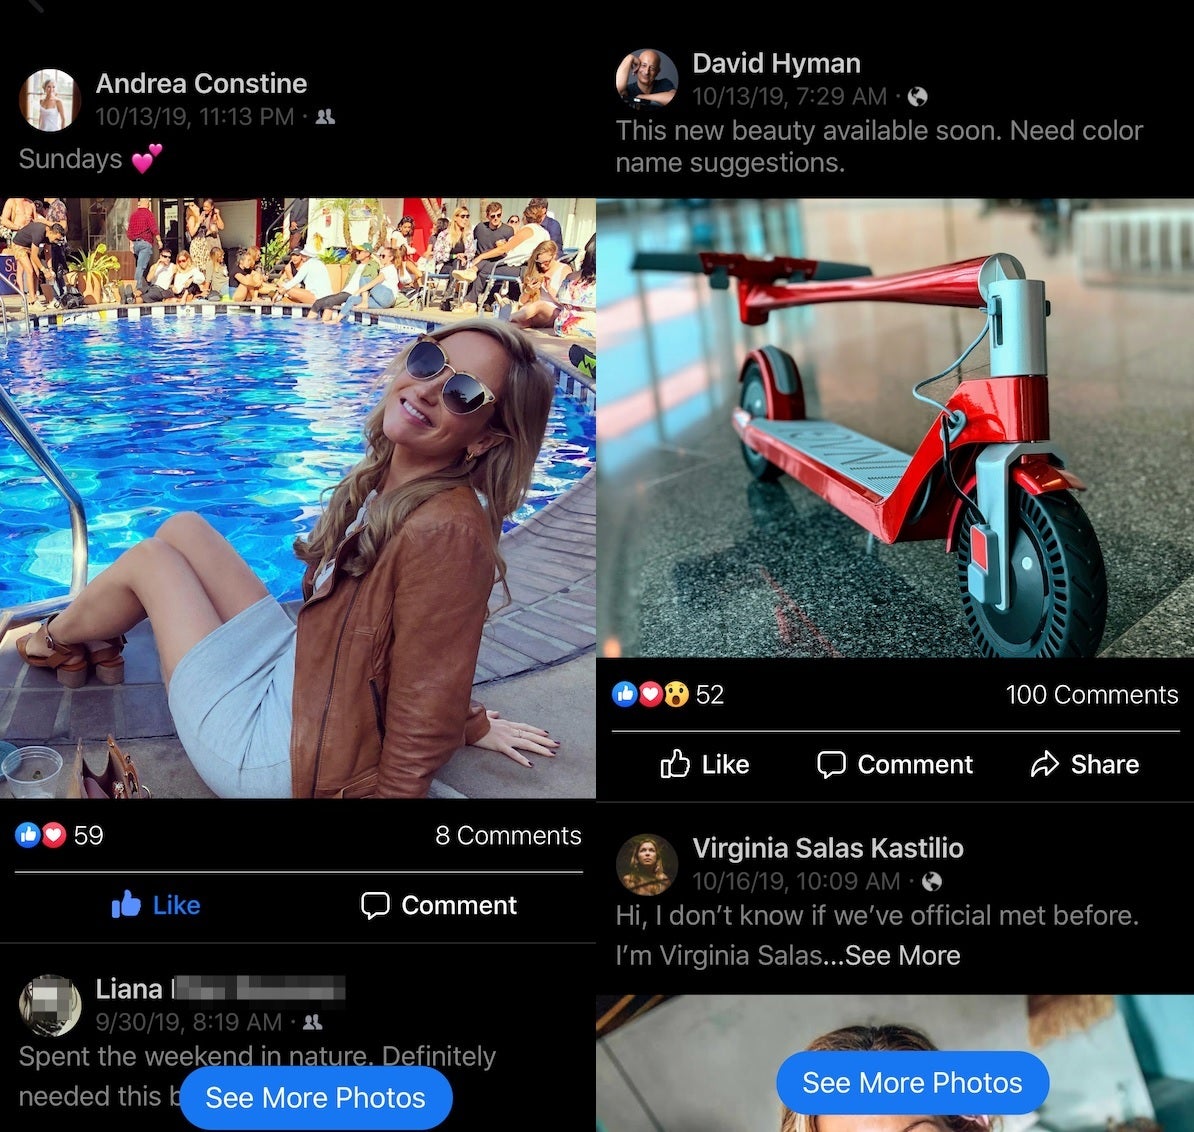 Facebook tests Instagram-esque Popular Photos - Facebook tests a feature copied from its own family member